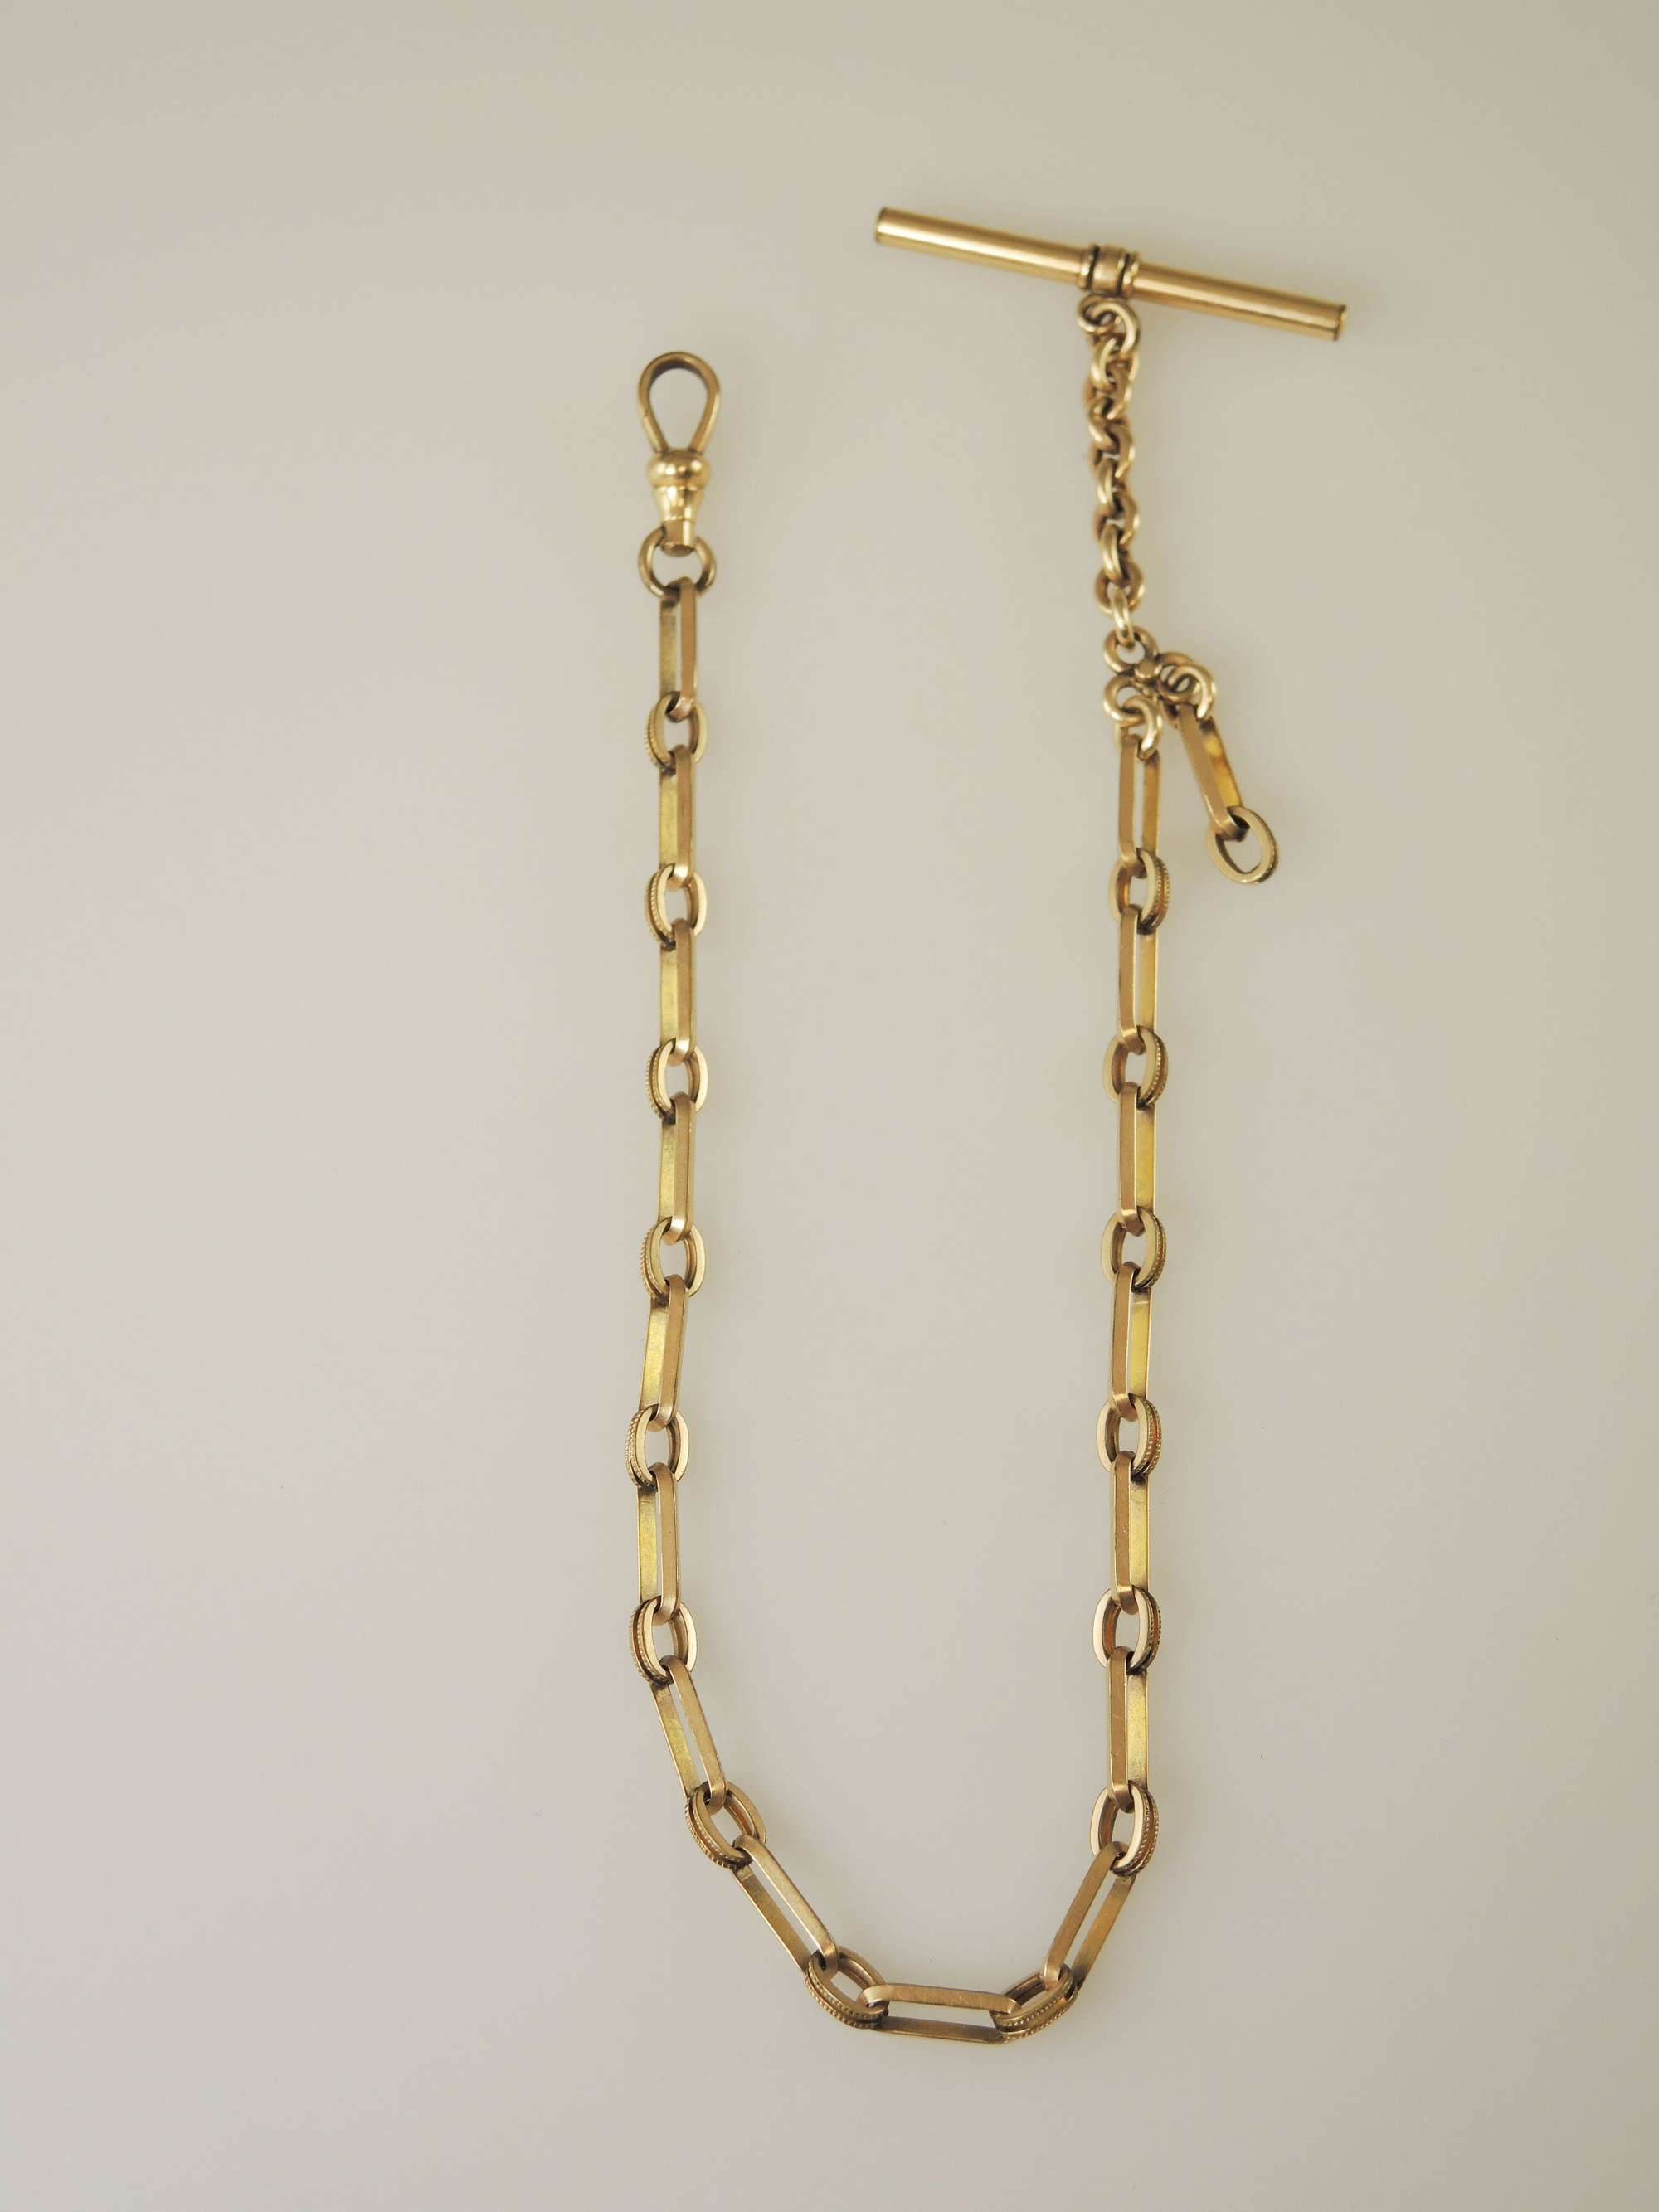 Gold plated pocket watch chain c1890